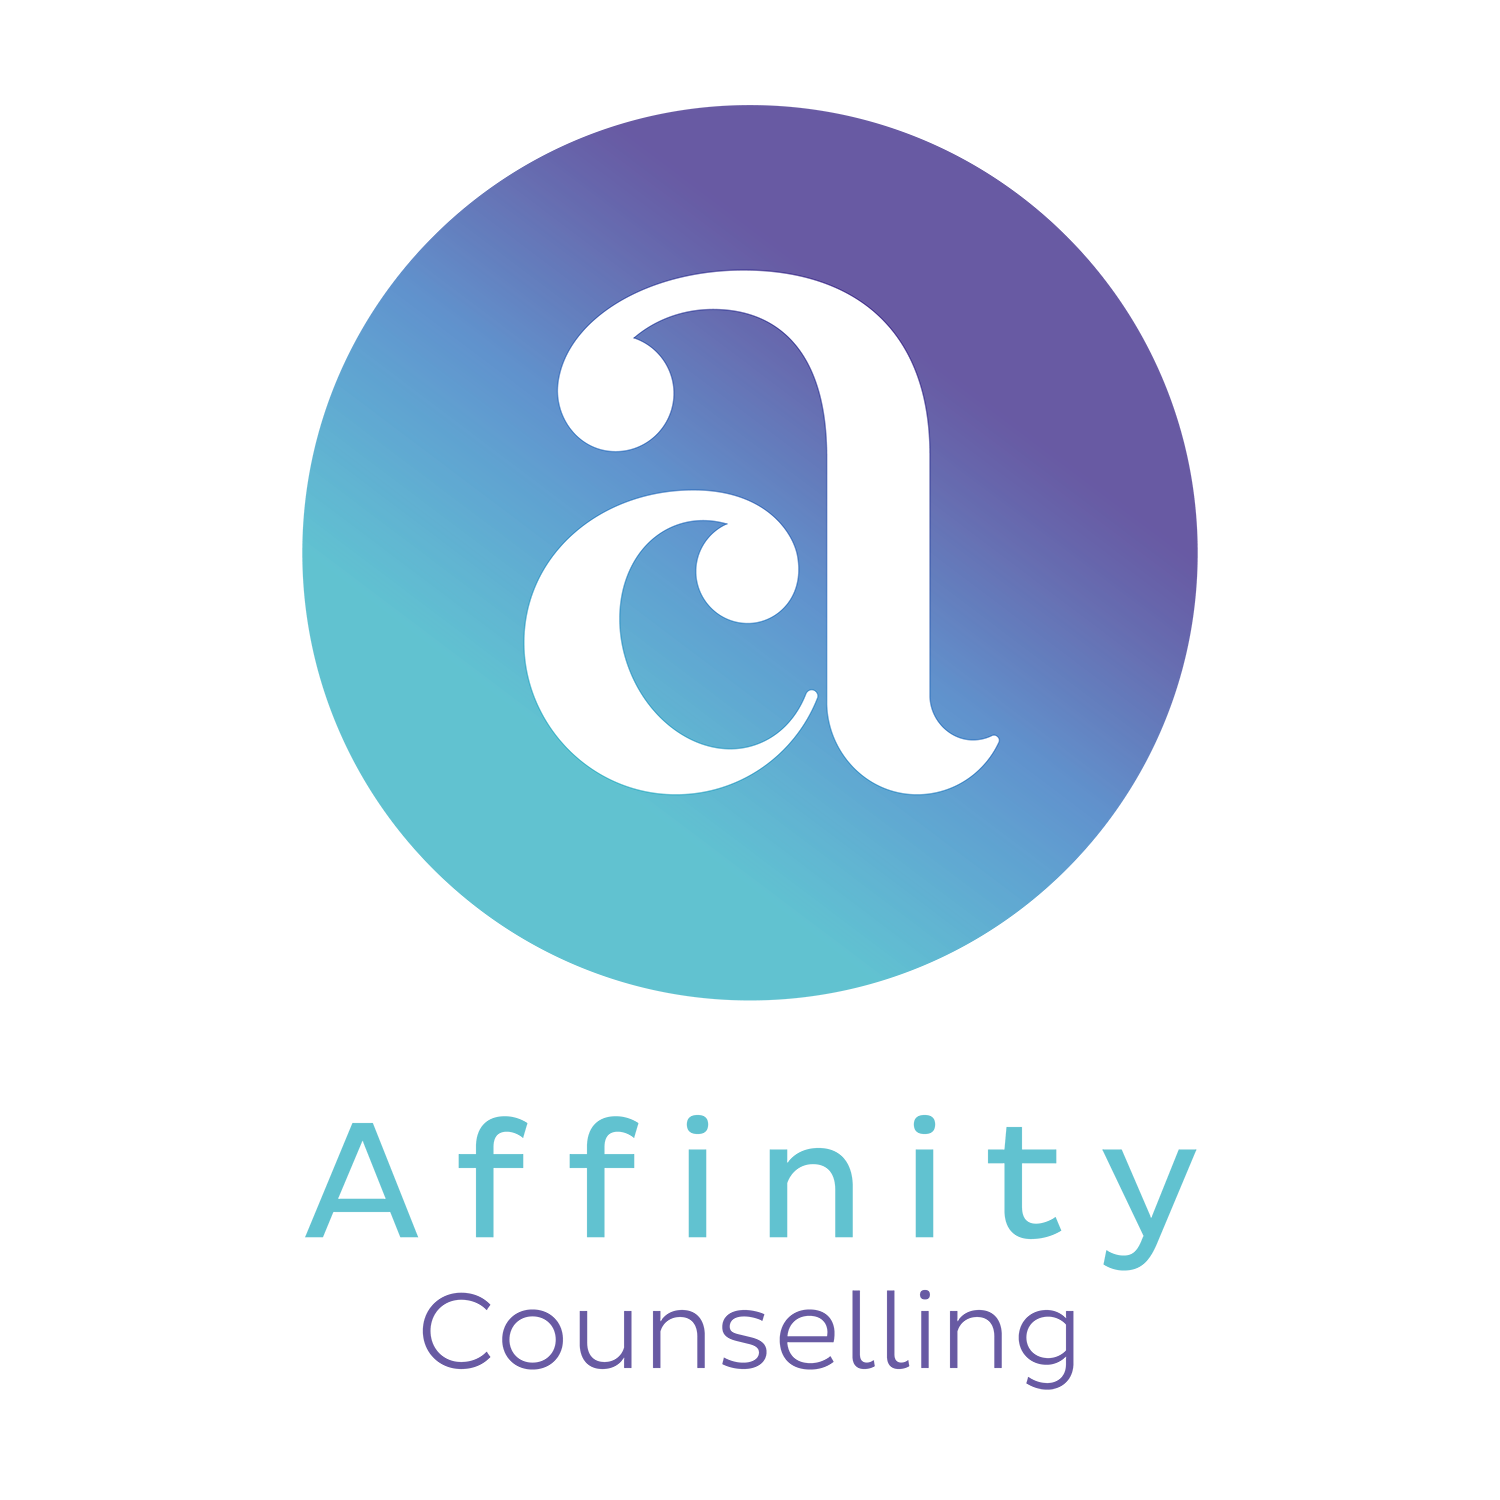 Affinity Counselling